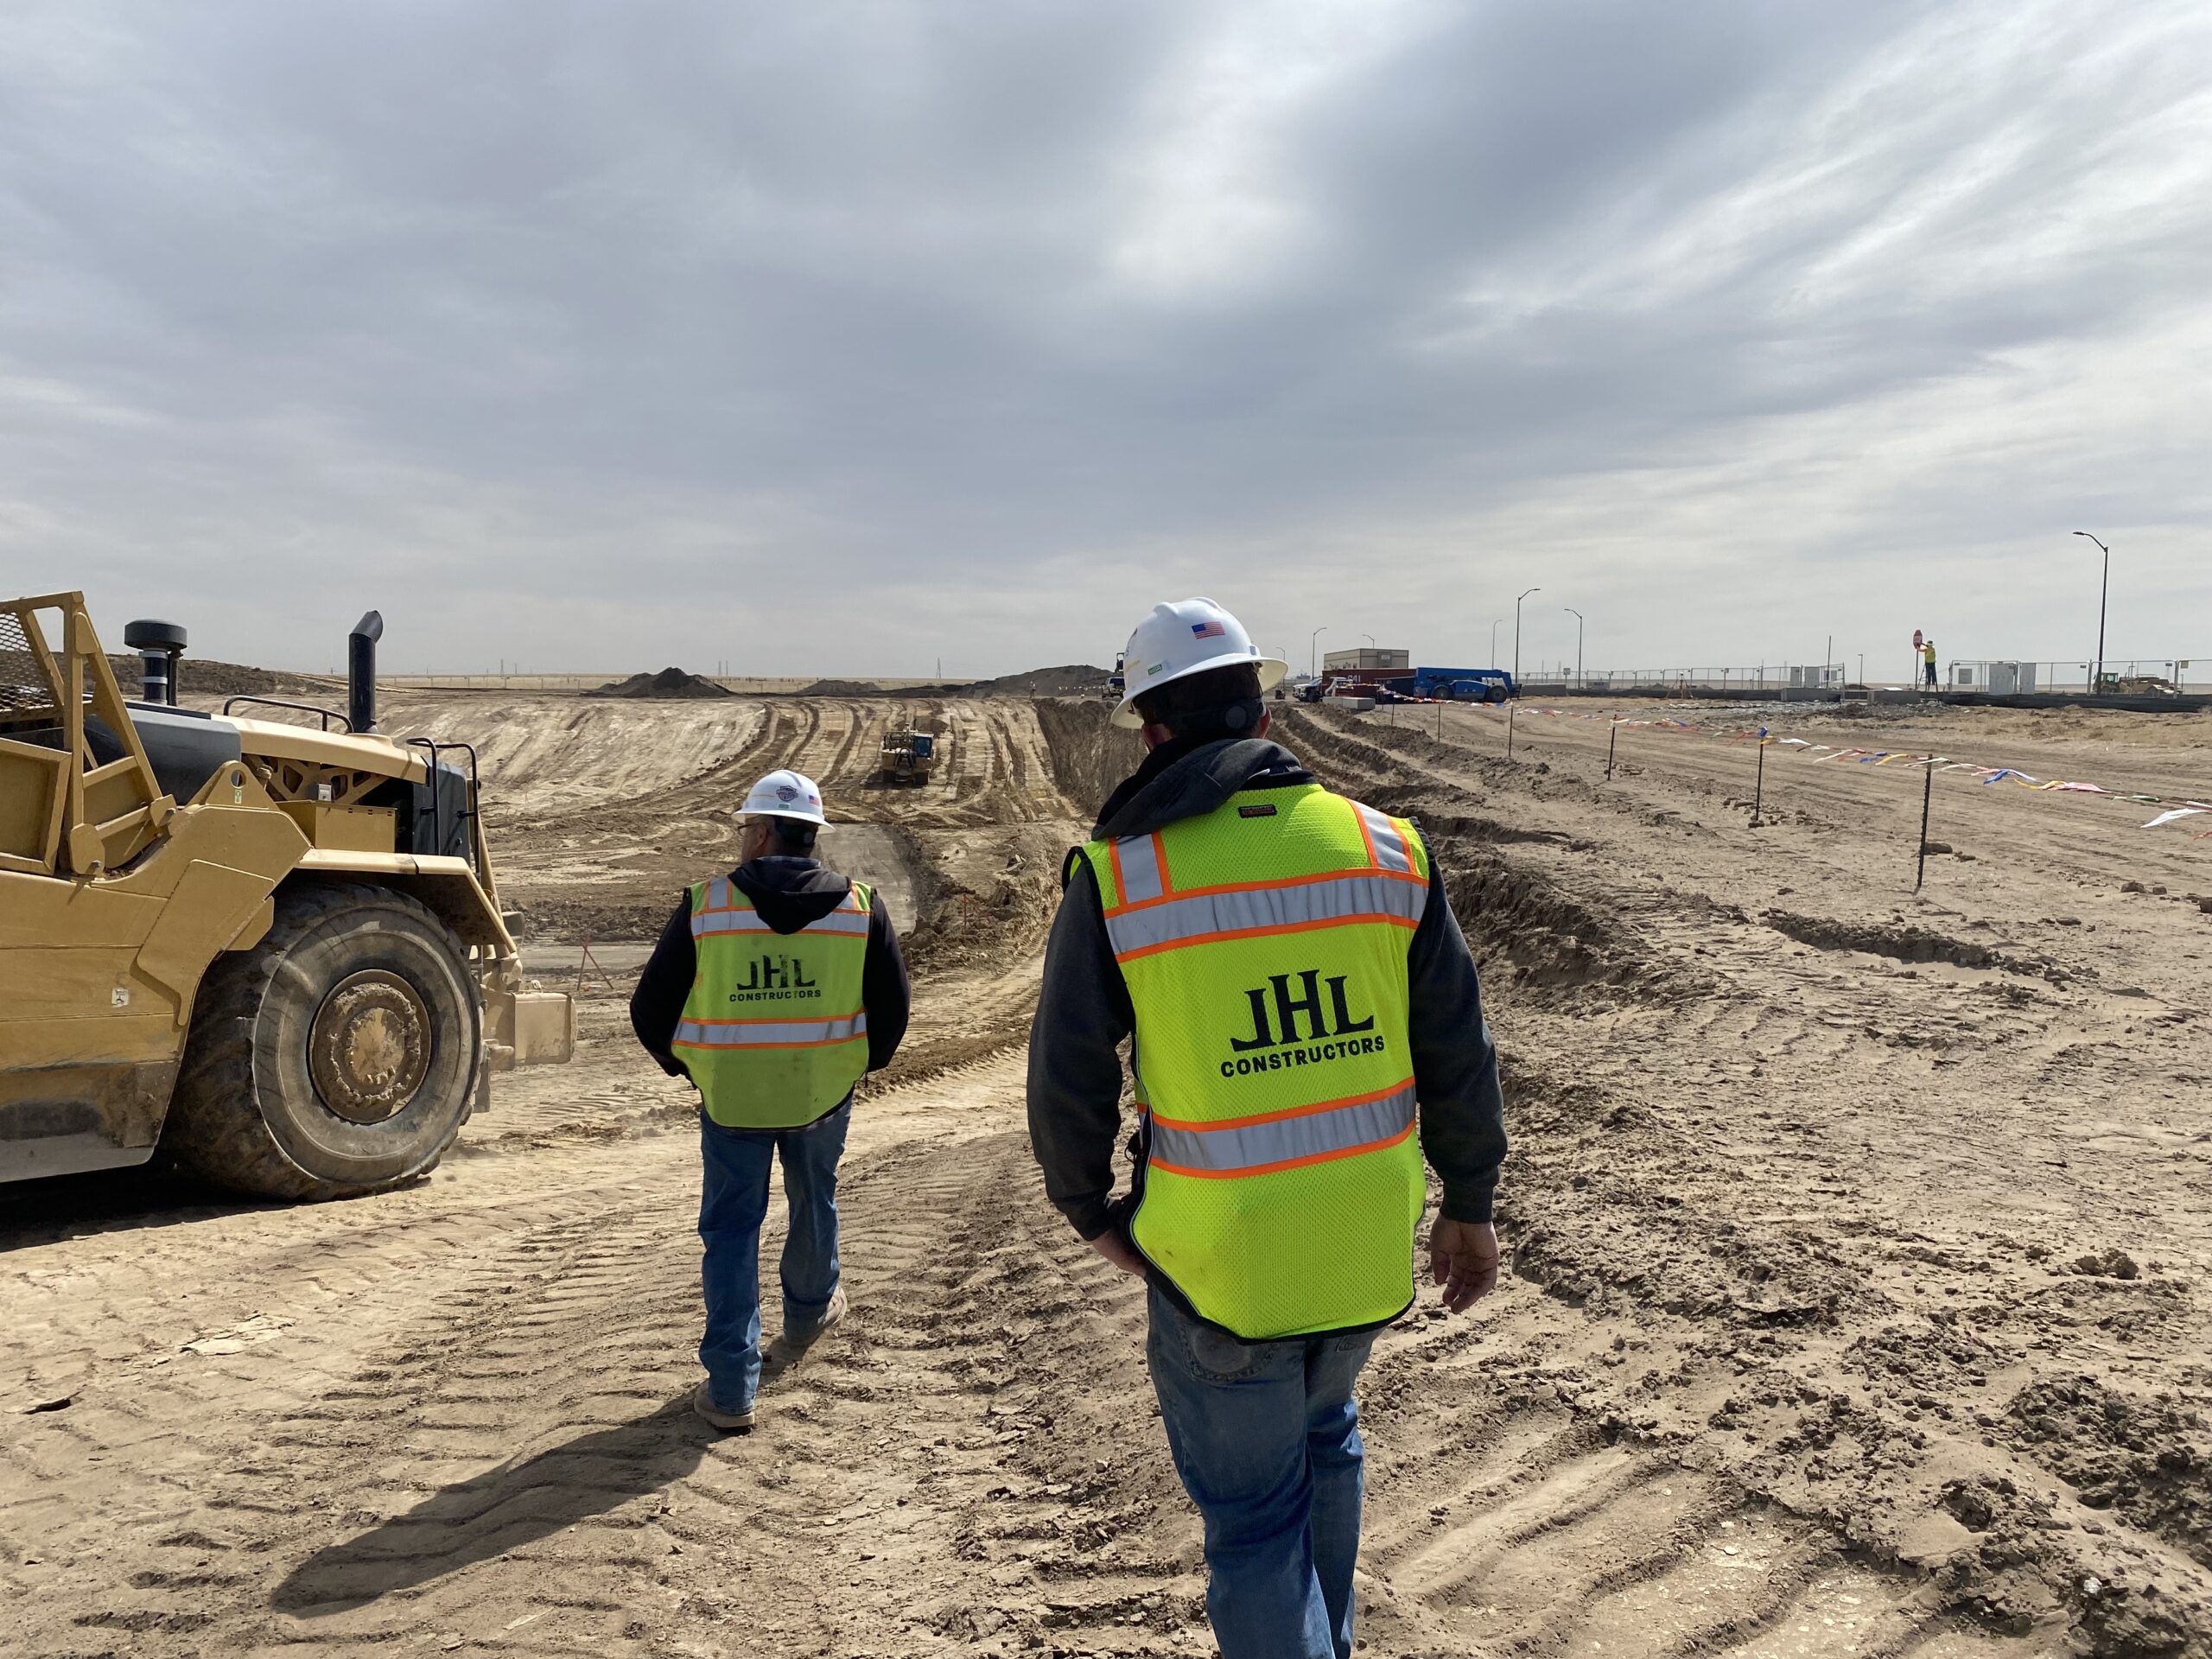 JHL employees at a developer site